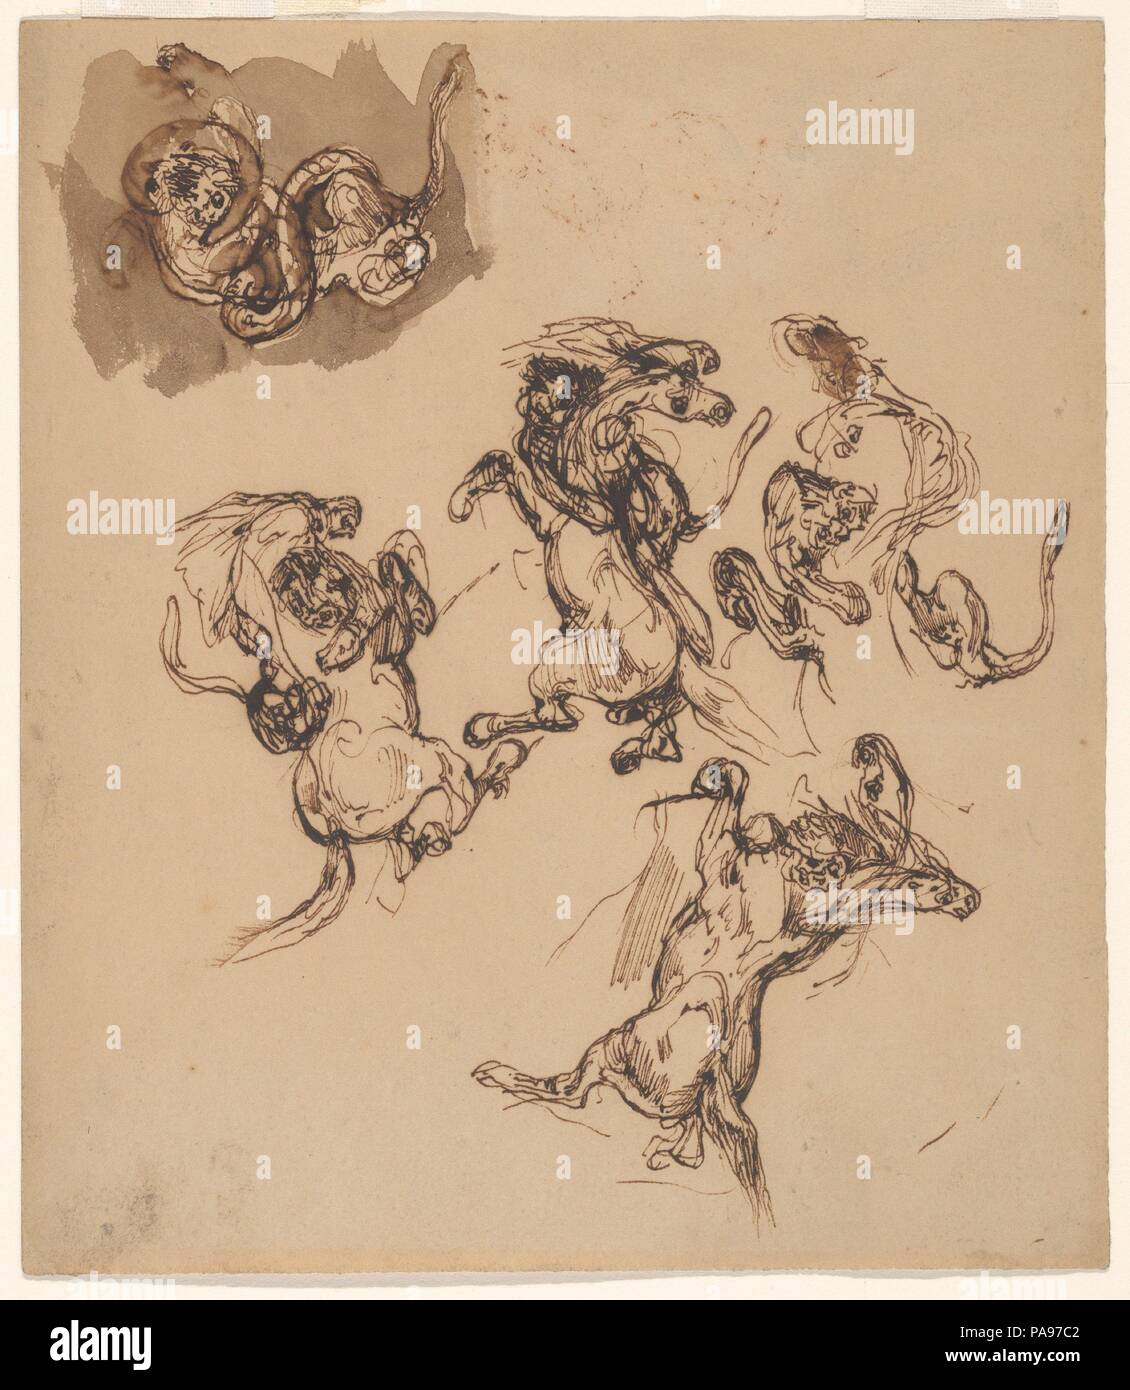 Studies of a Rearing Horse Attacked by a Lion; A Lion Wrestling with a Serpent. Artist: Eugène Delacroix (French, Charenton-Saint-Maurice 1798-1863 Paris). Dimensions: sheet: 6 1/4 x 5 3/8 in. (13.6 x 15.9 cm). Date: 1820-63. Museum: Metropolitan Museum of Art, New York, USA. Stock Photo